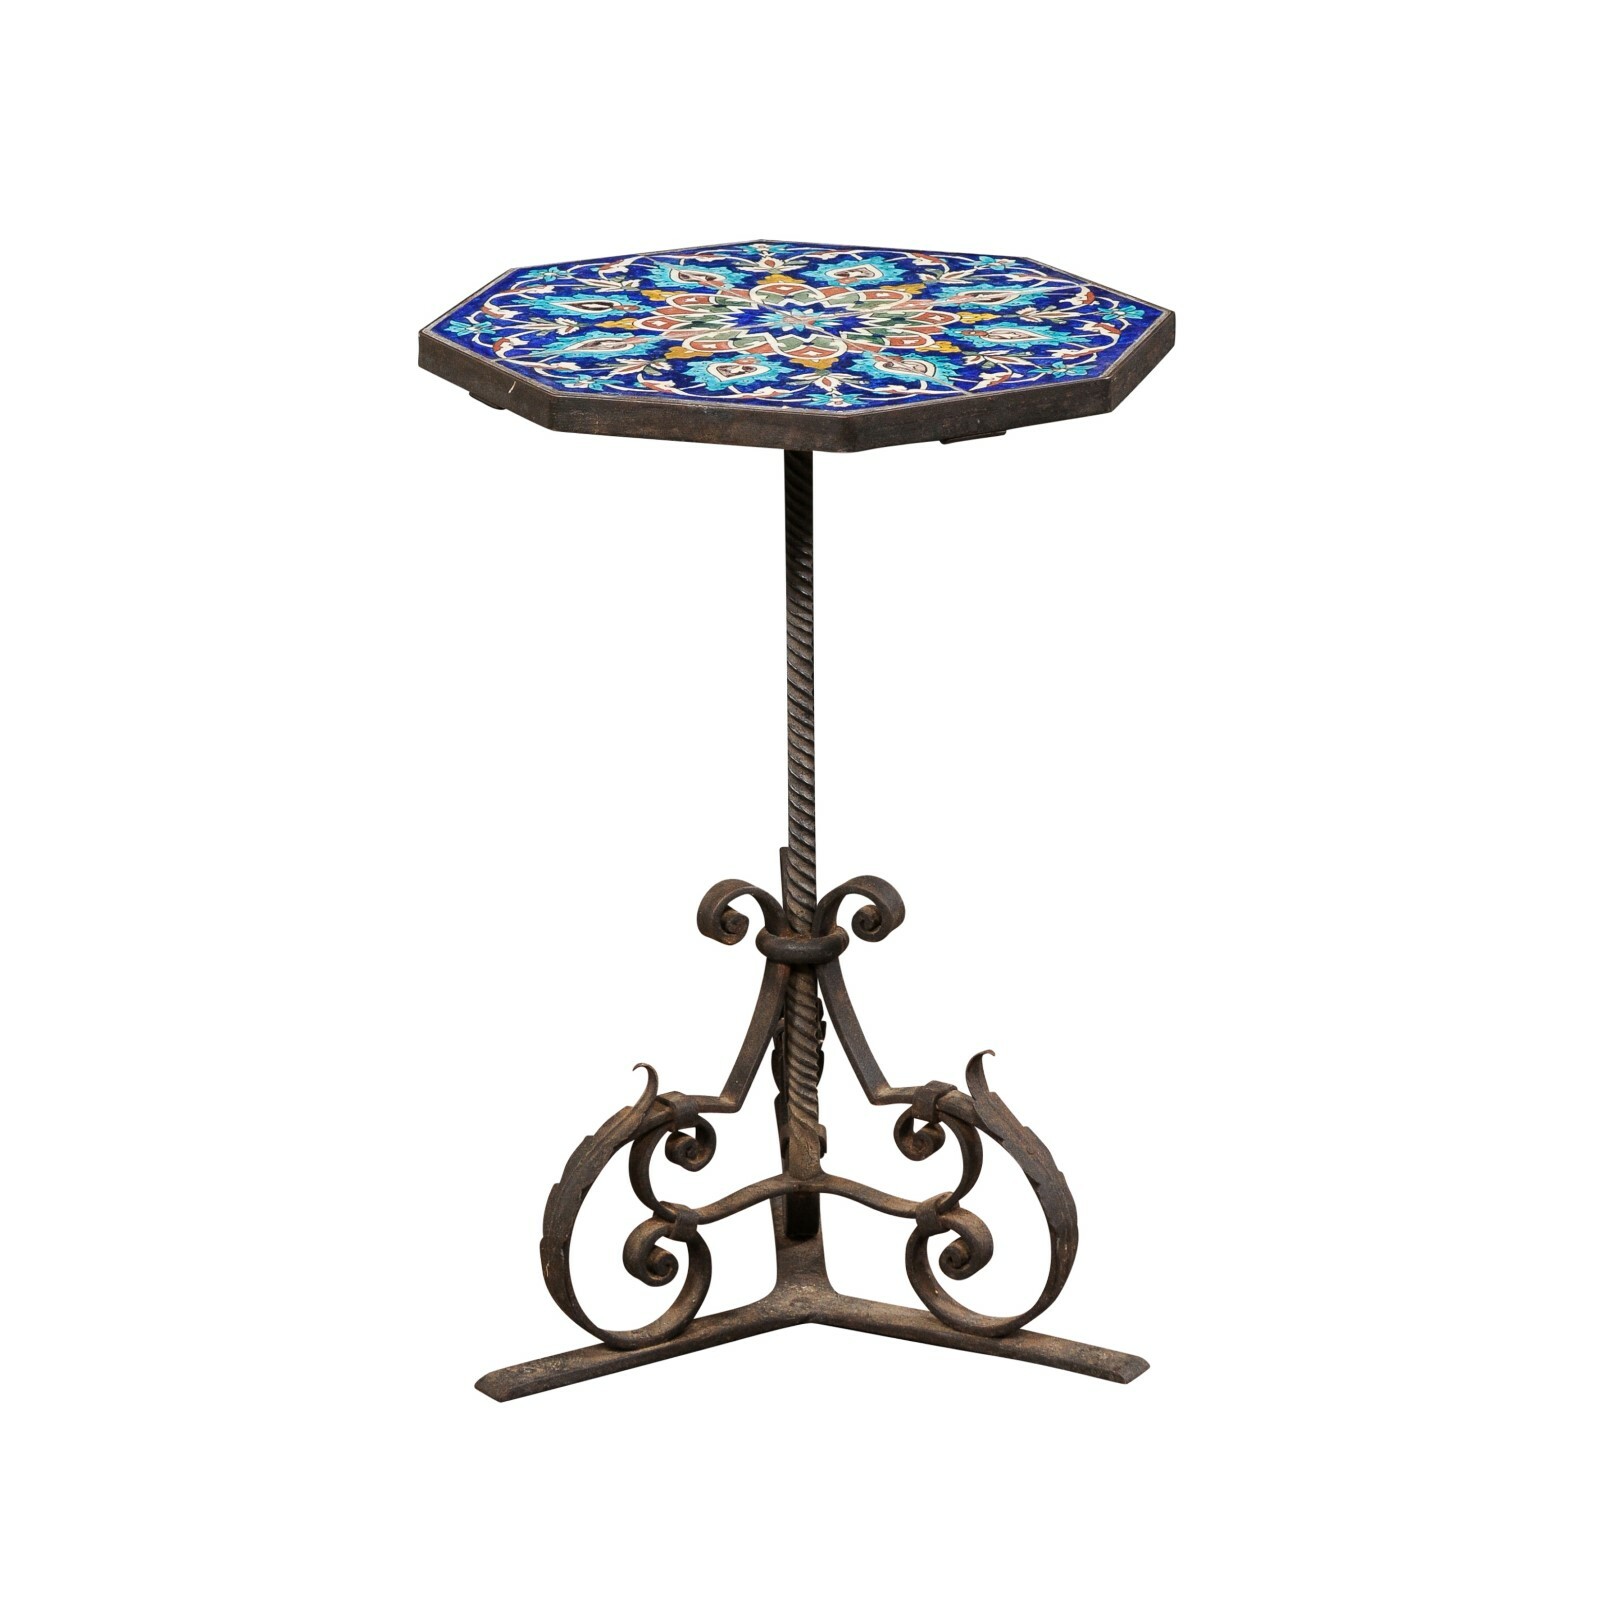 Spanish Iron Drinks Table w/Tile Top